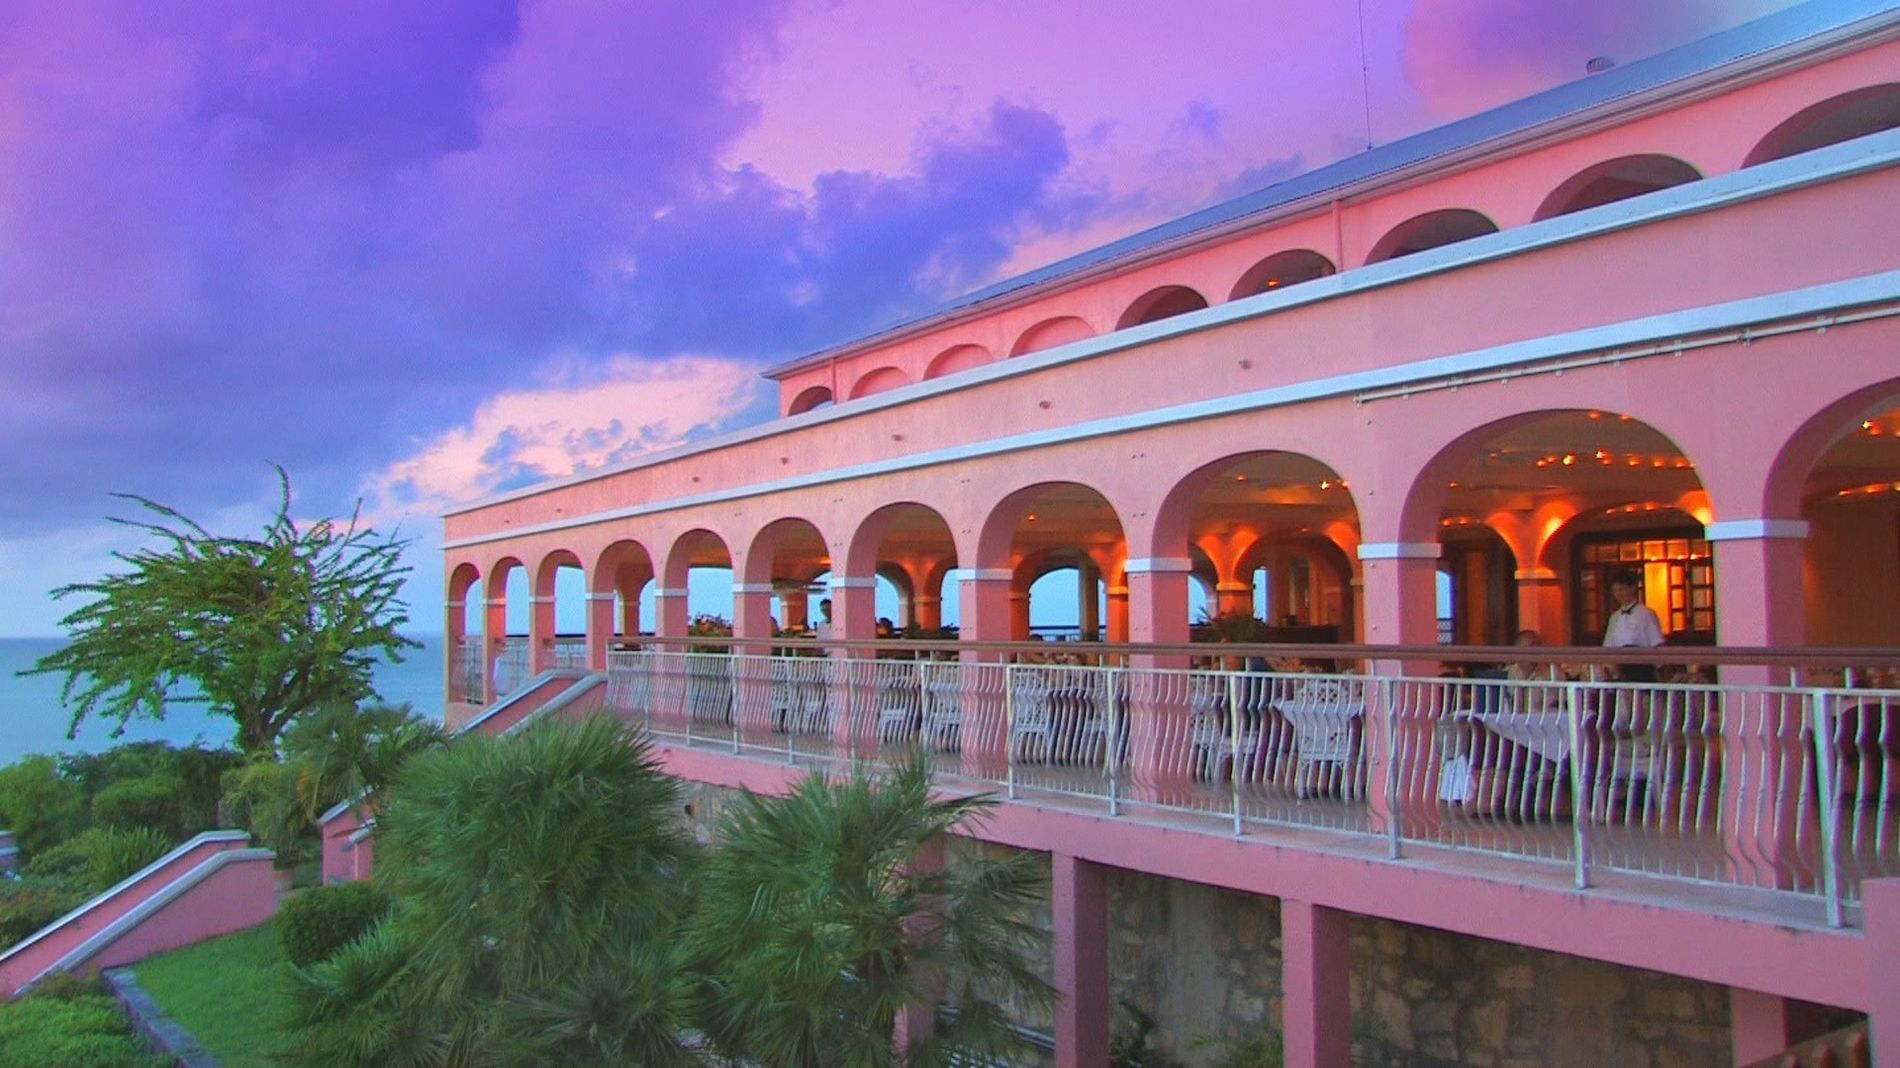 View of The Terrace restaurant in Buccaneer Hotel at sunset